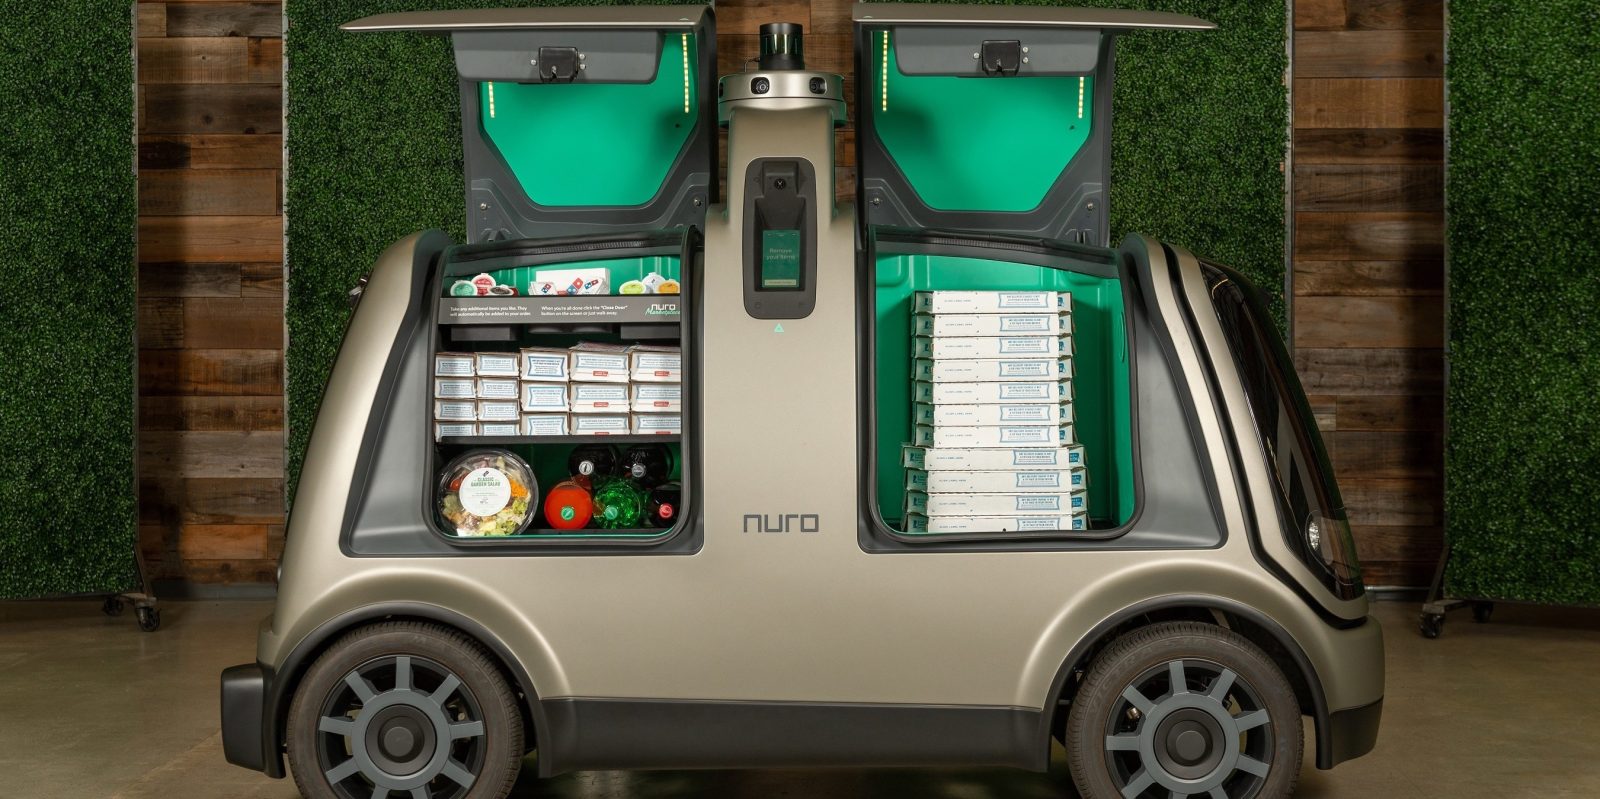 Nuro's autonomous R2 vehicle will deliver Domino's pizza to Houston customers this year